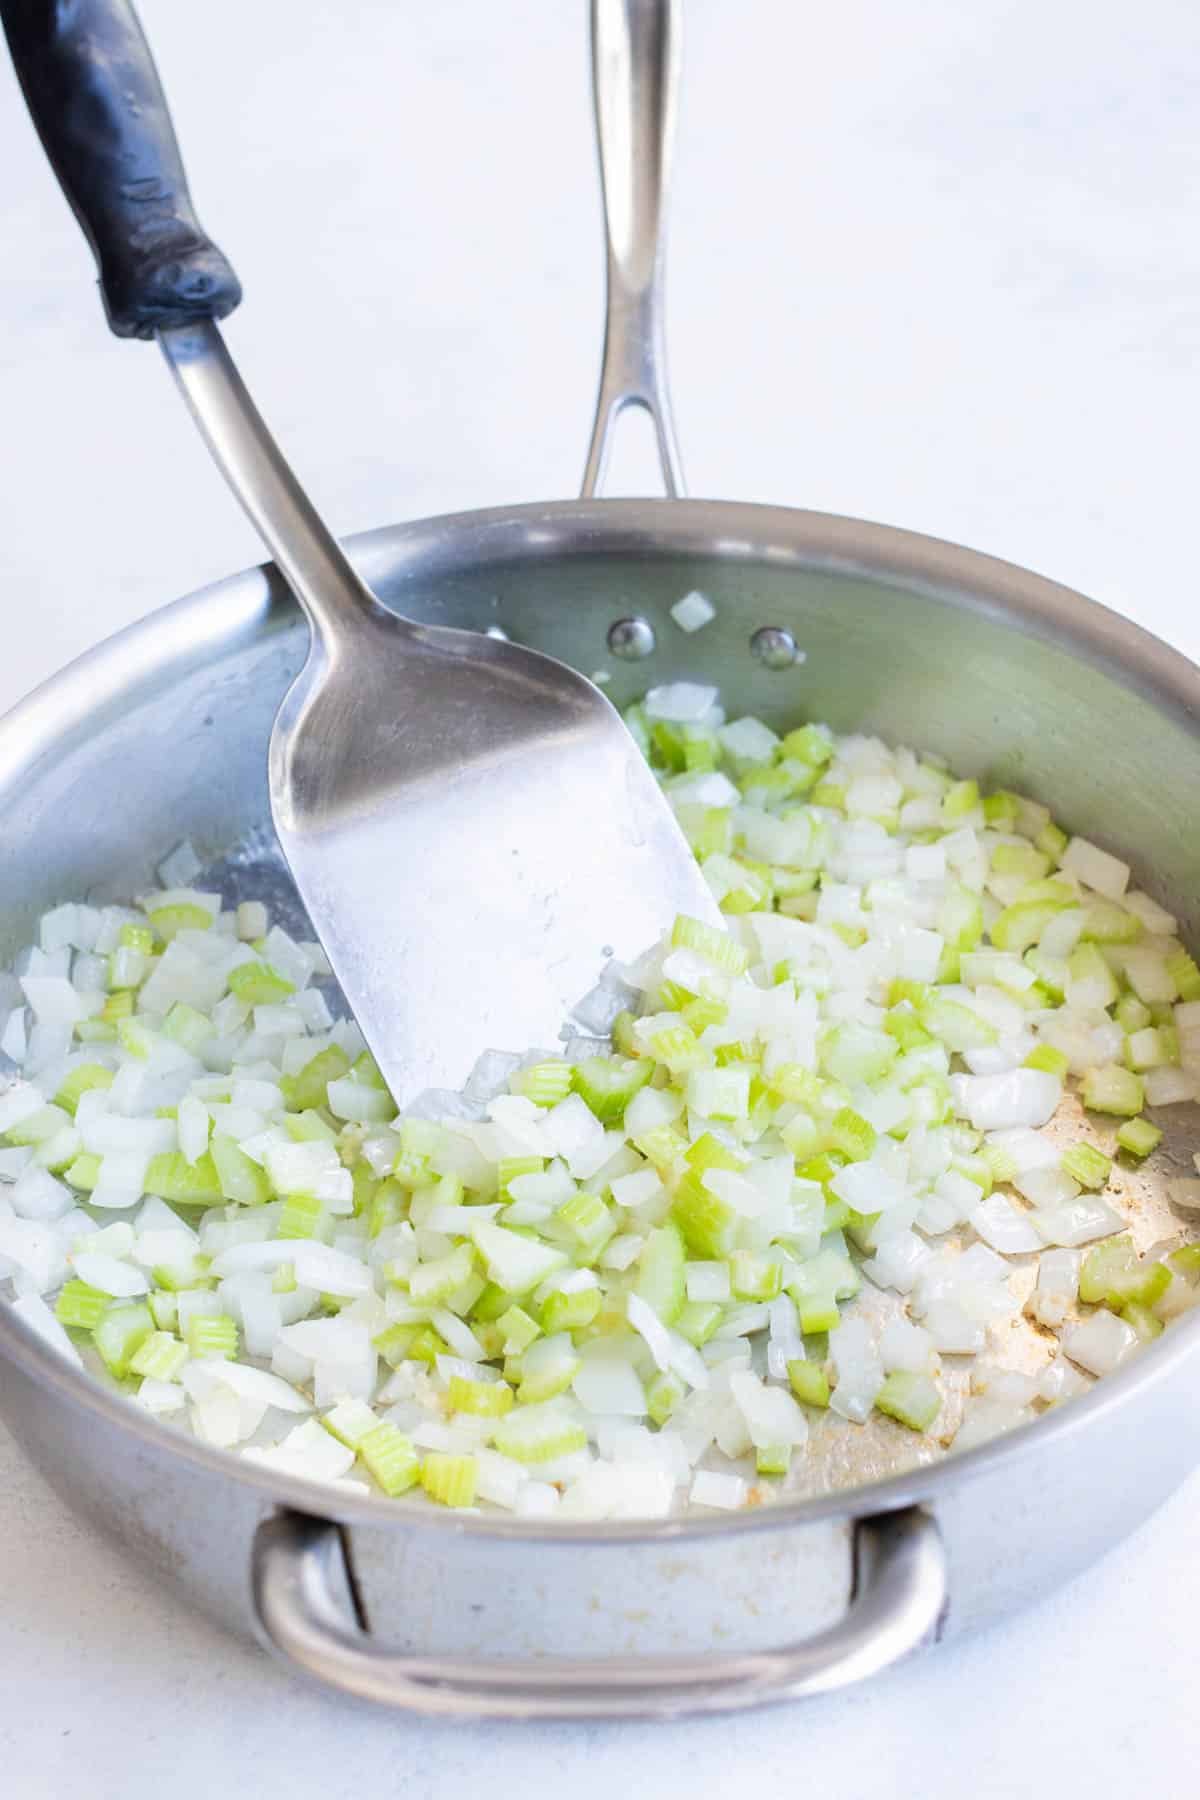 Celery and onions are cooked together.